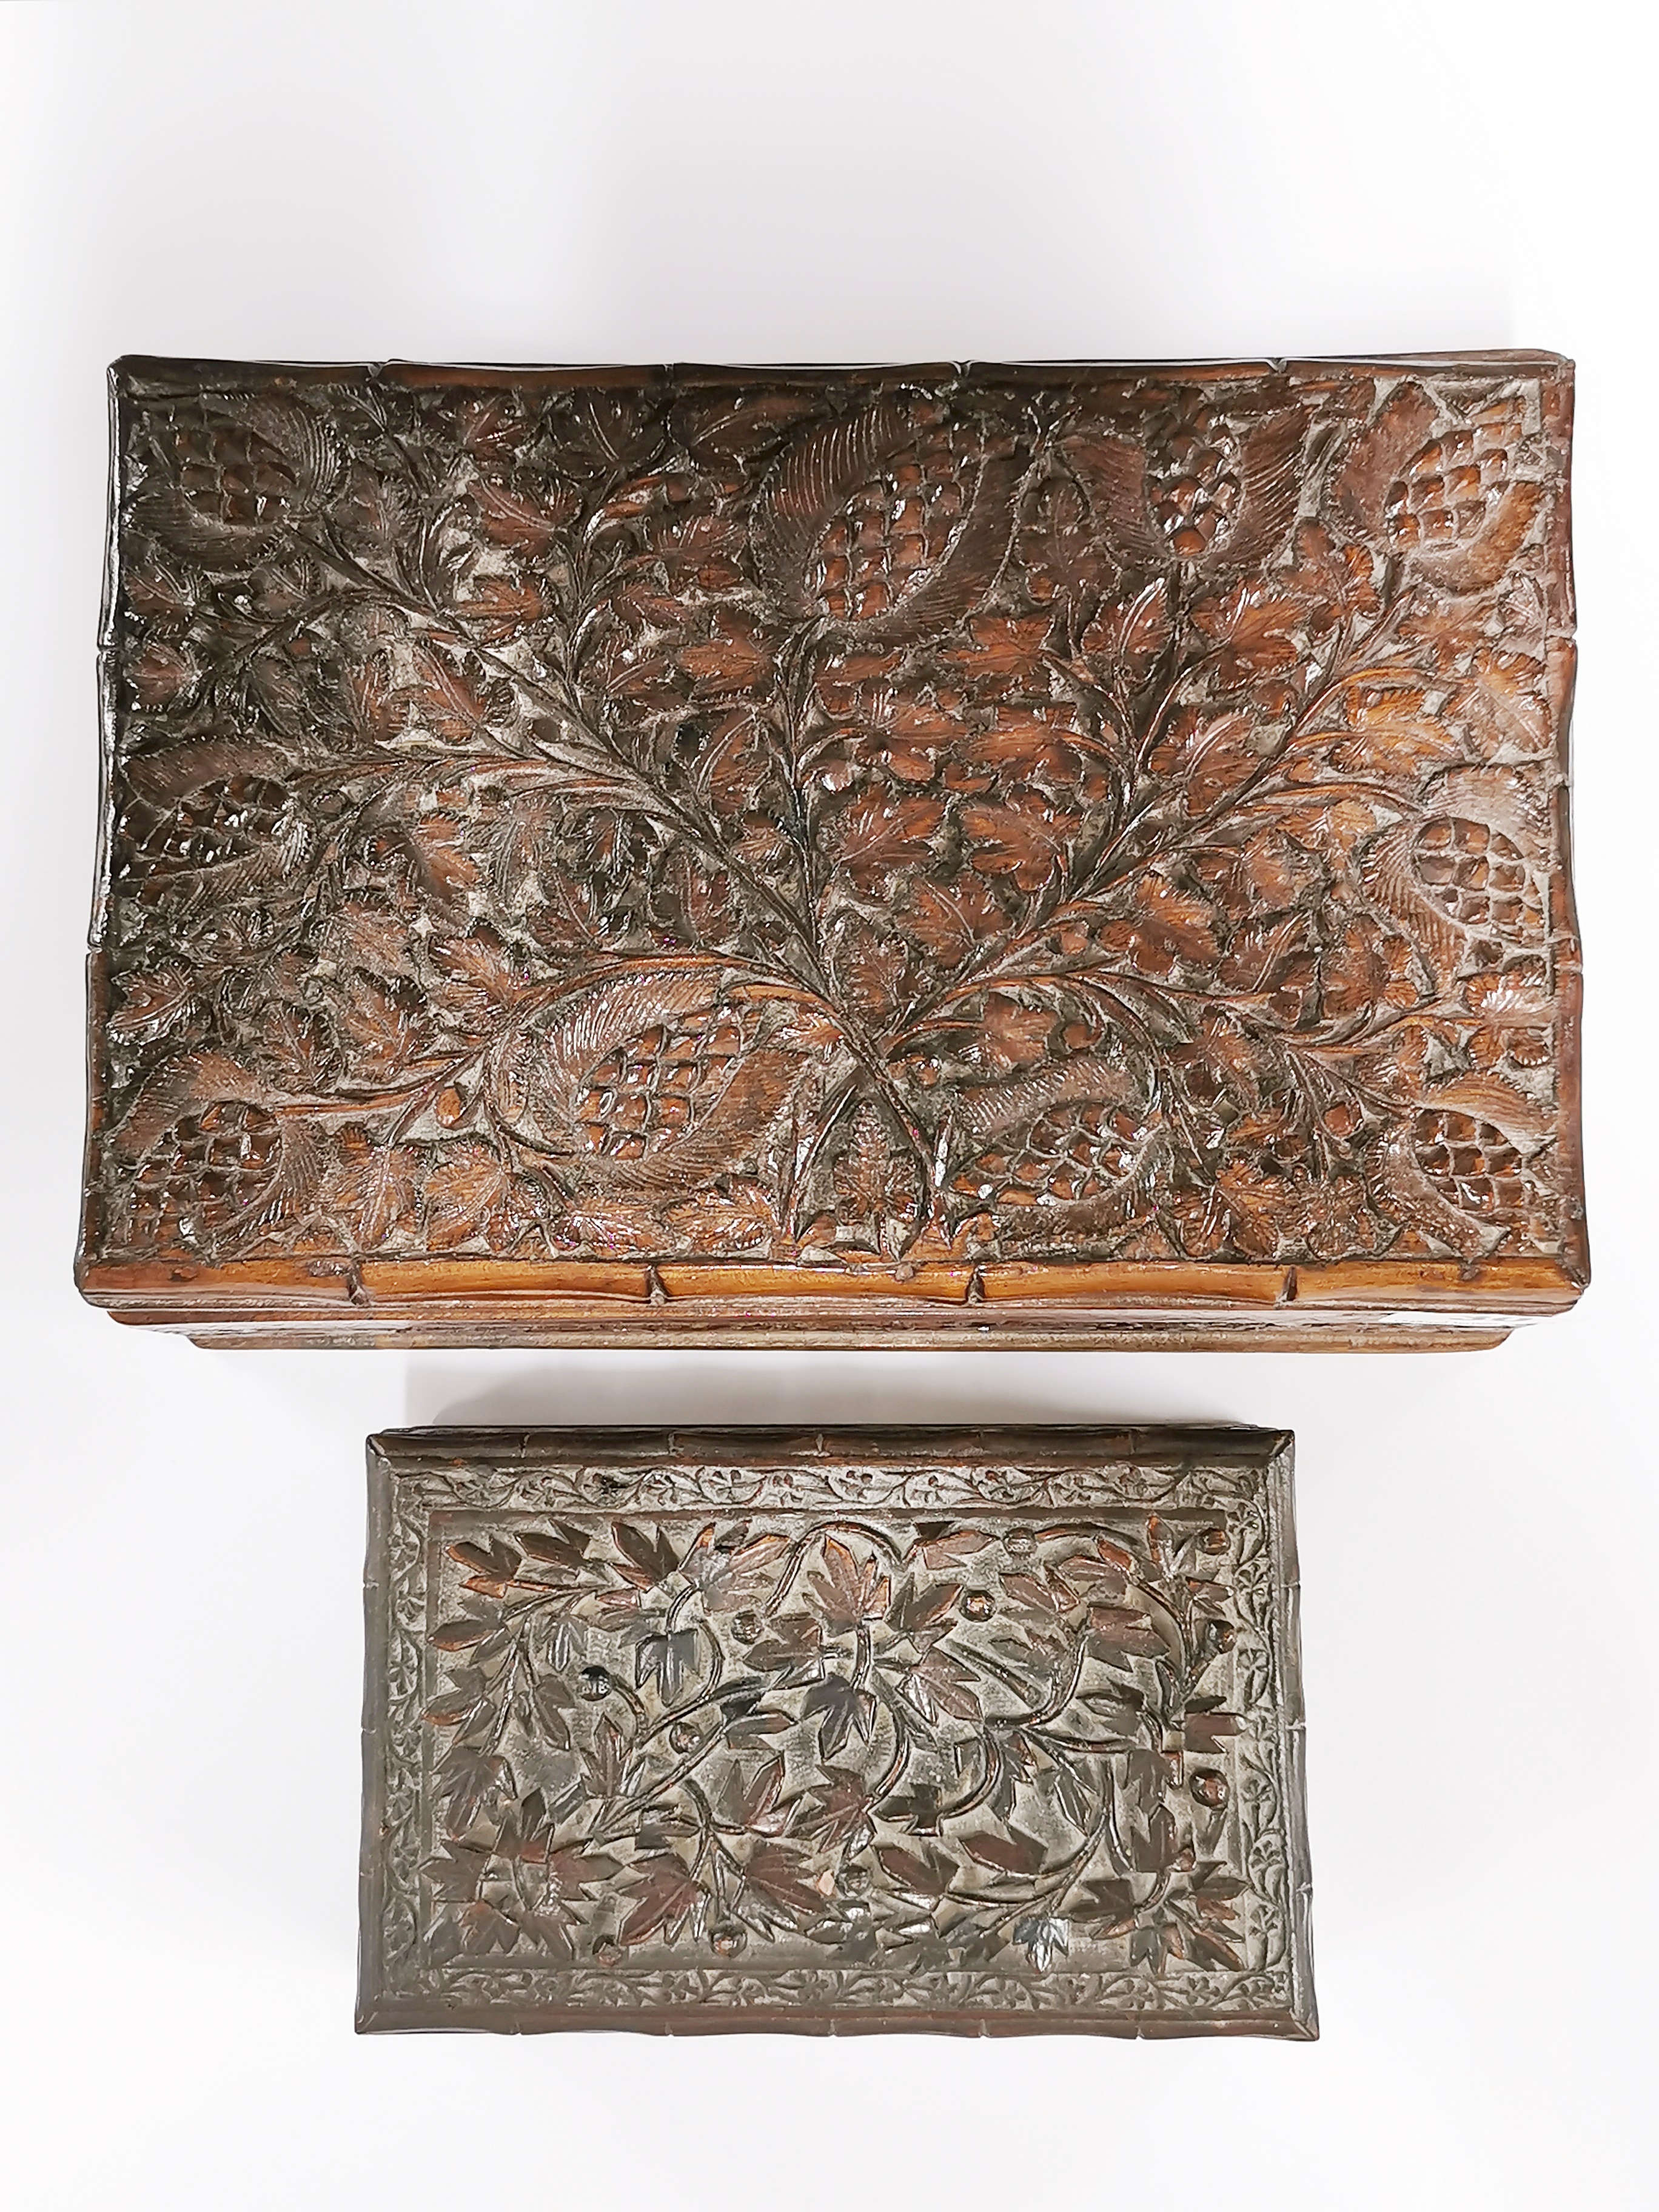 Two carved wooden work boxes, largest 30 x 20 x 10cm. - Image 2 of 3